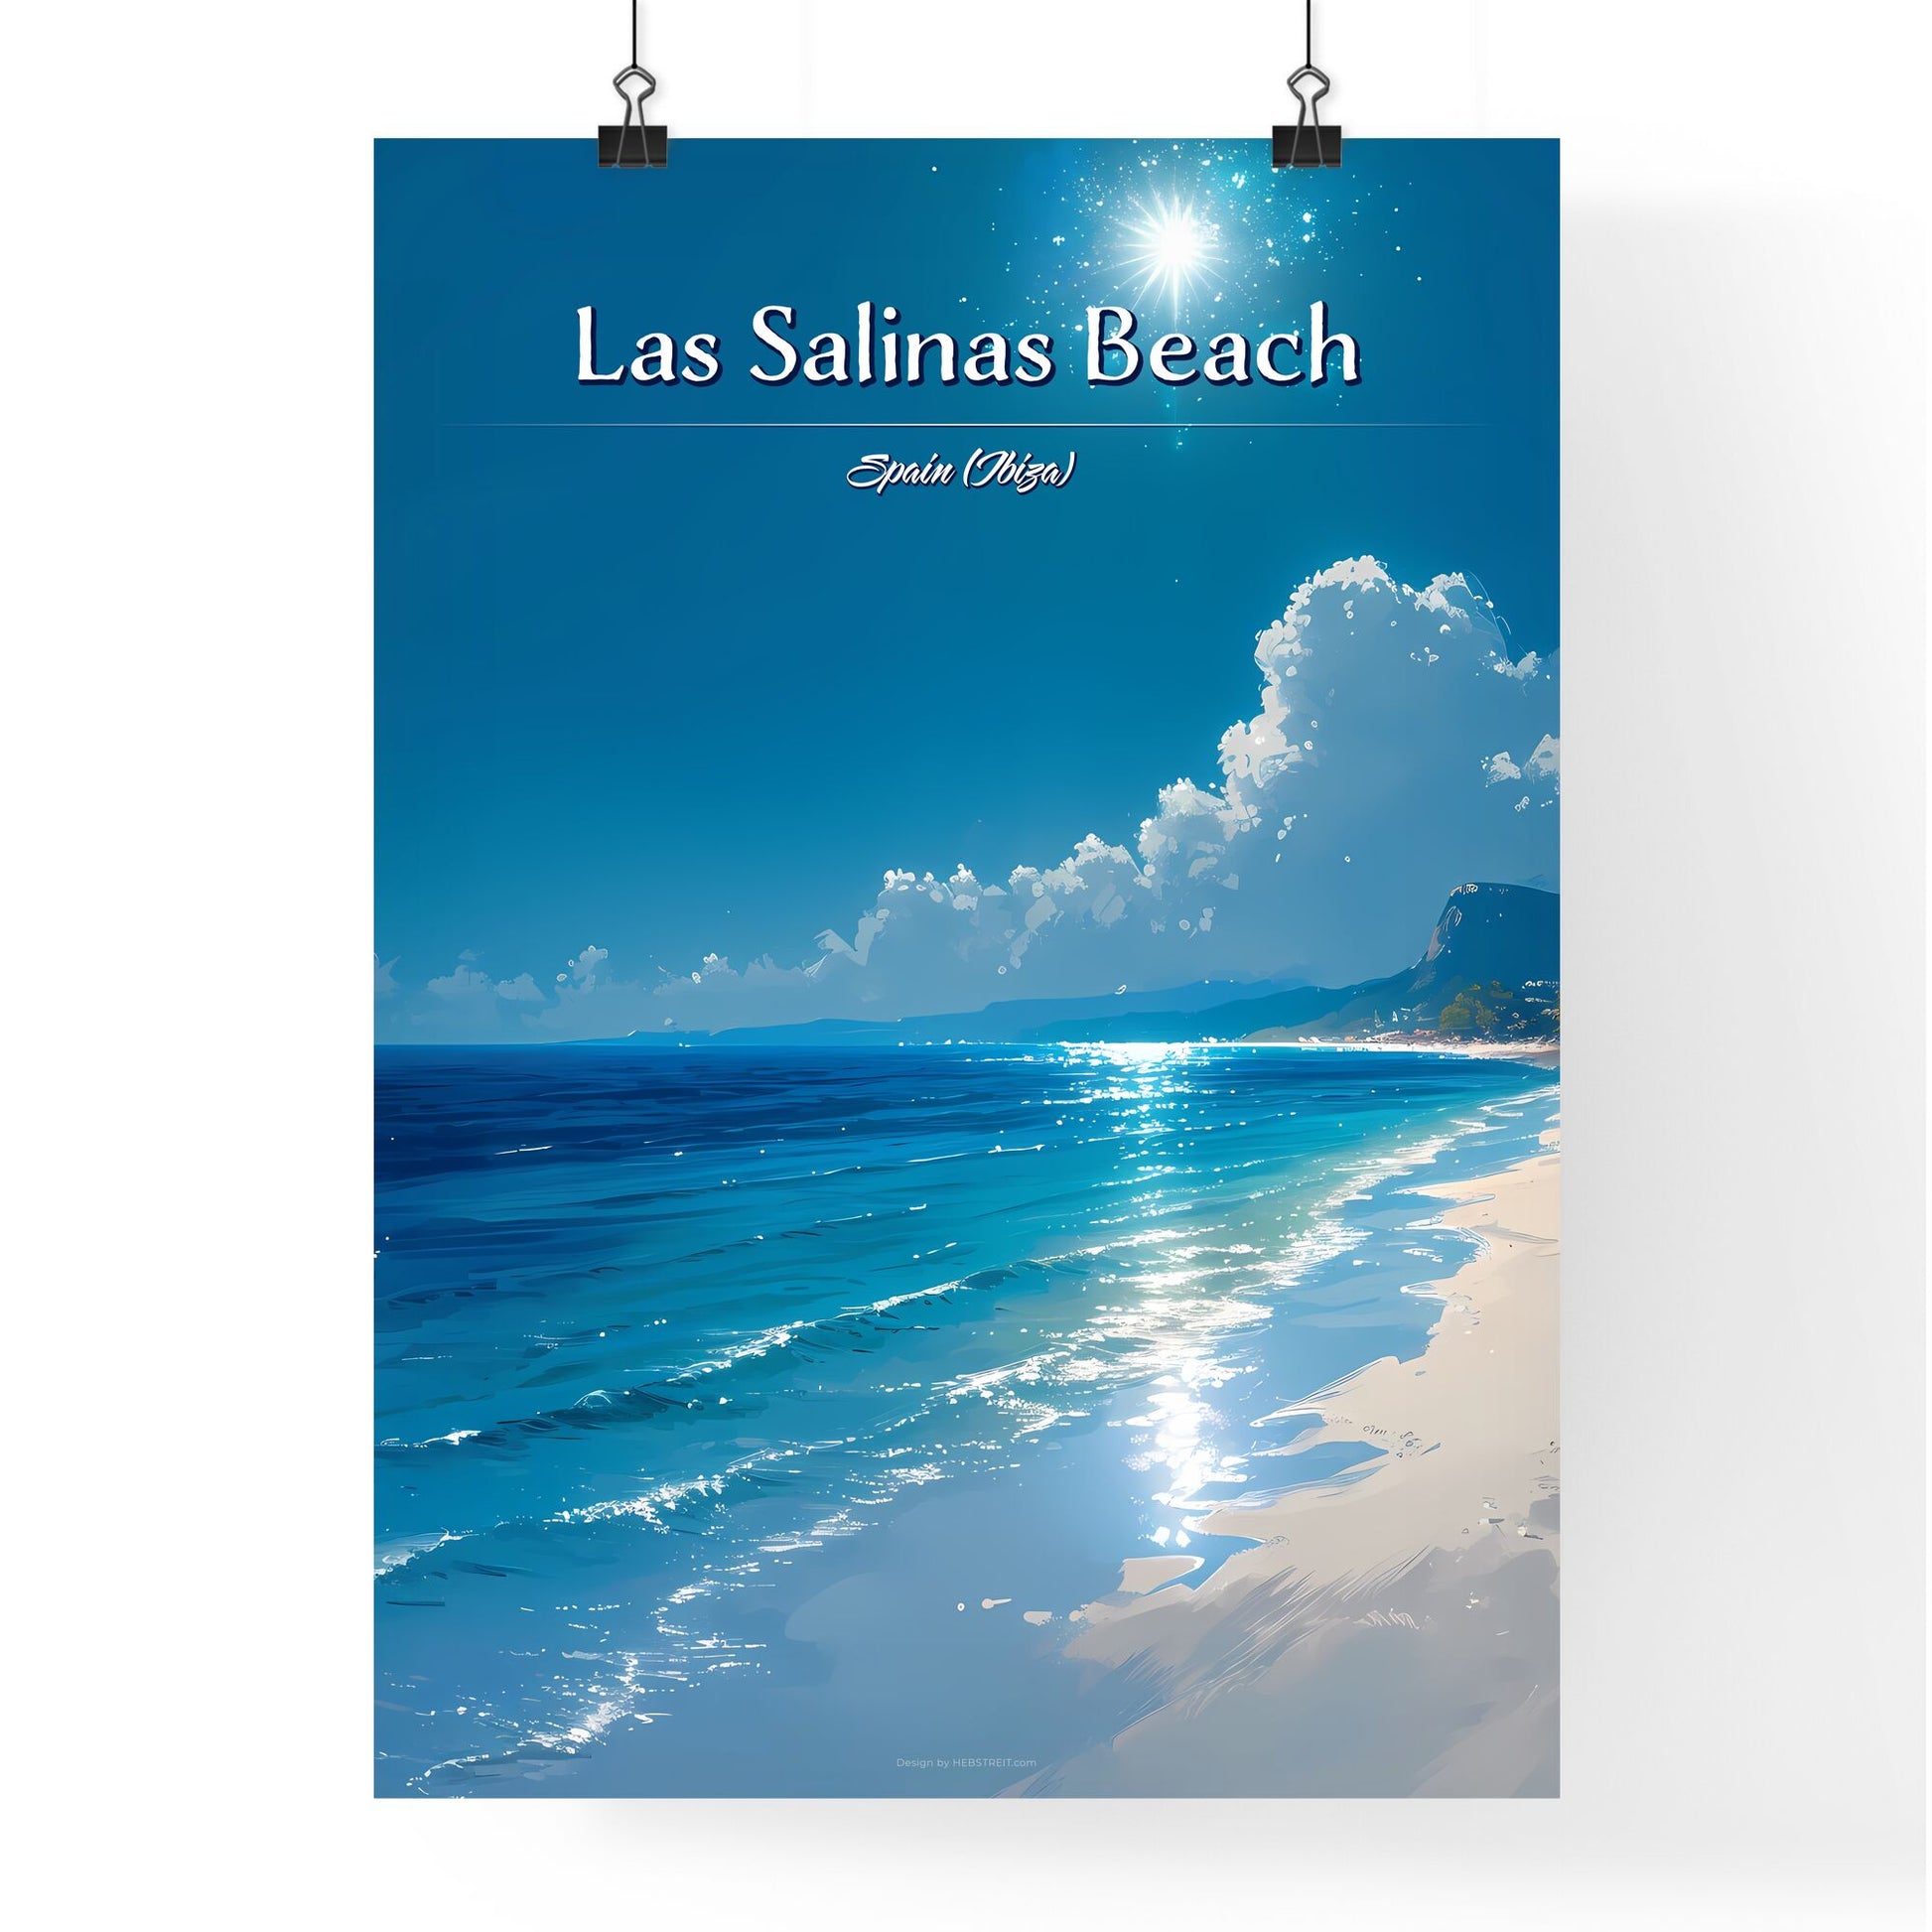 Las Salinas Beach, Spain (Ibiza) - Art print of a beach with blue water and clouds Default Title